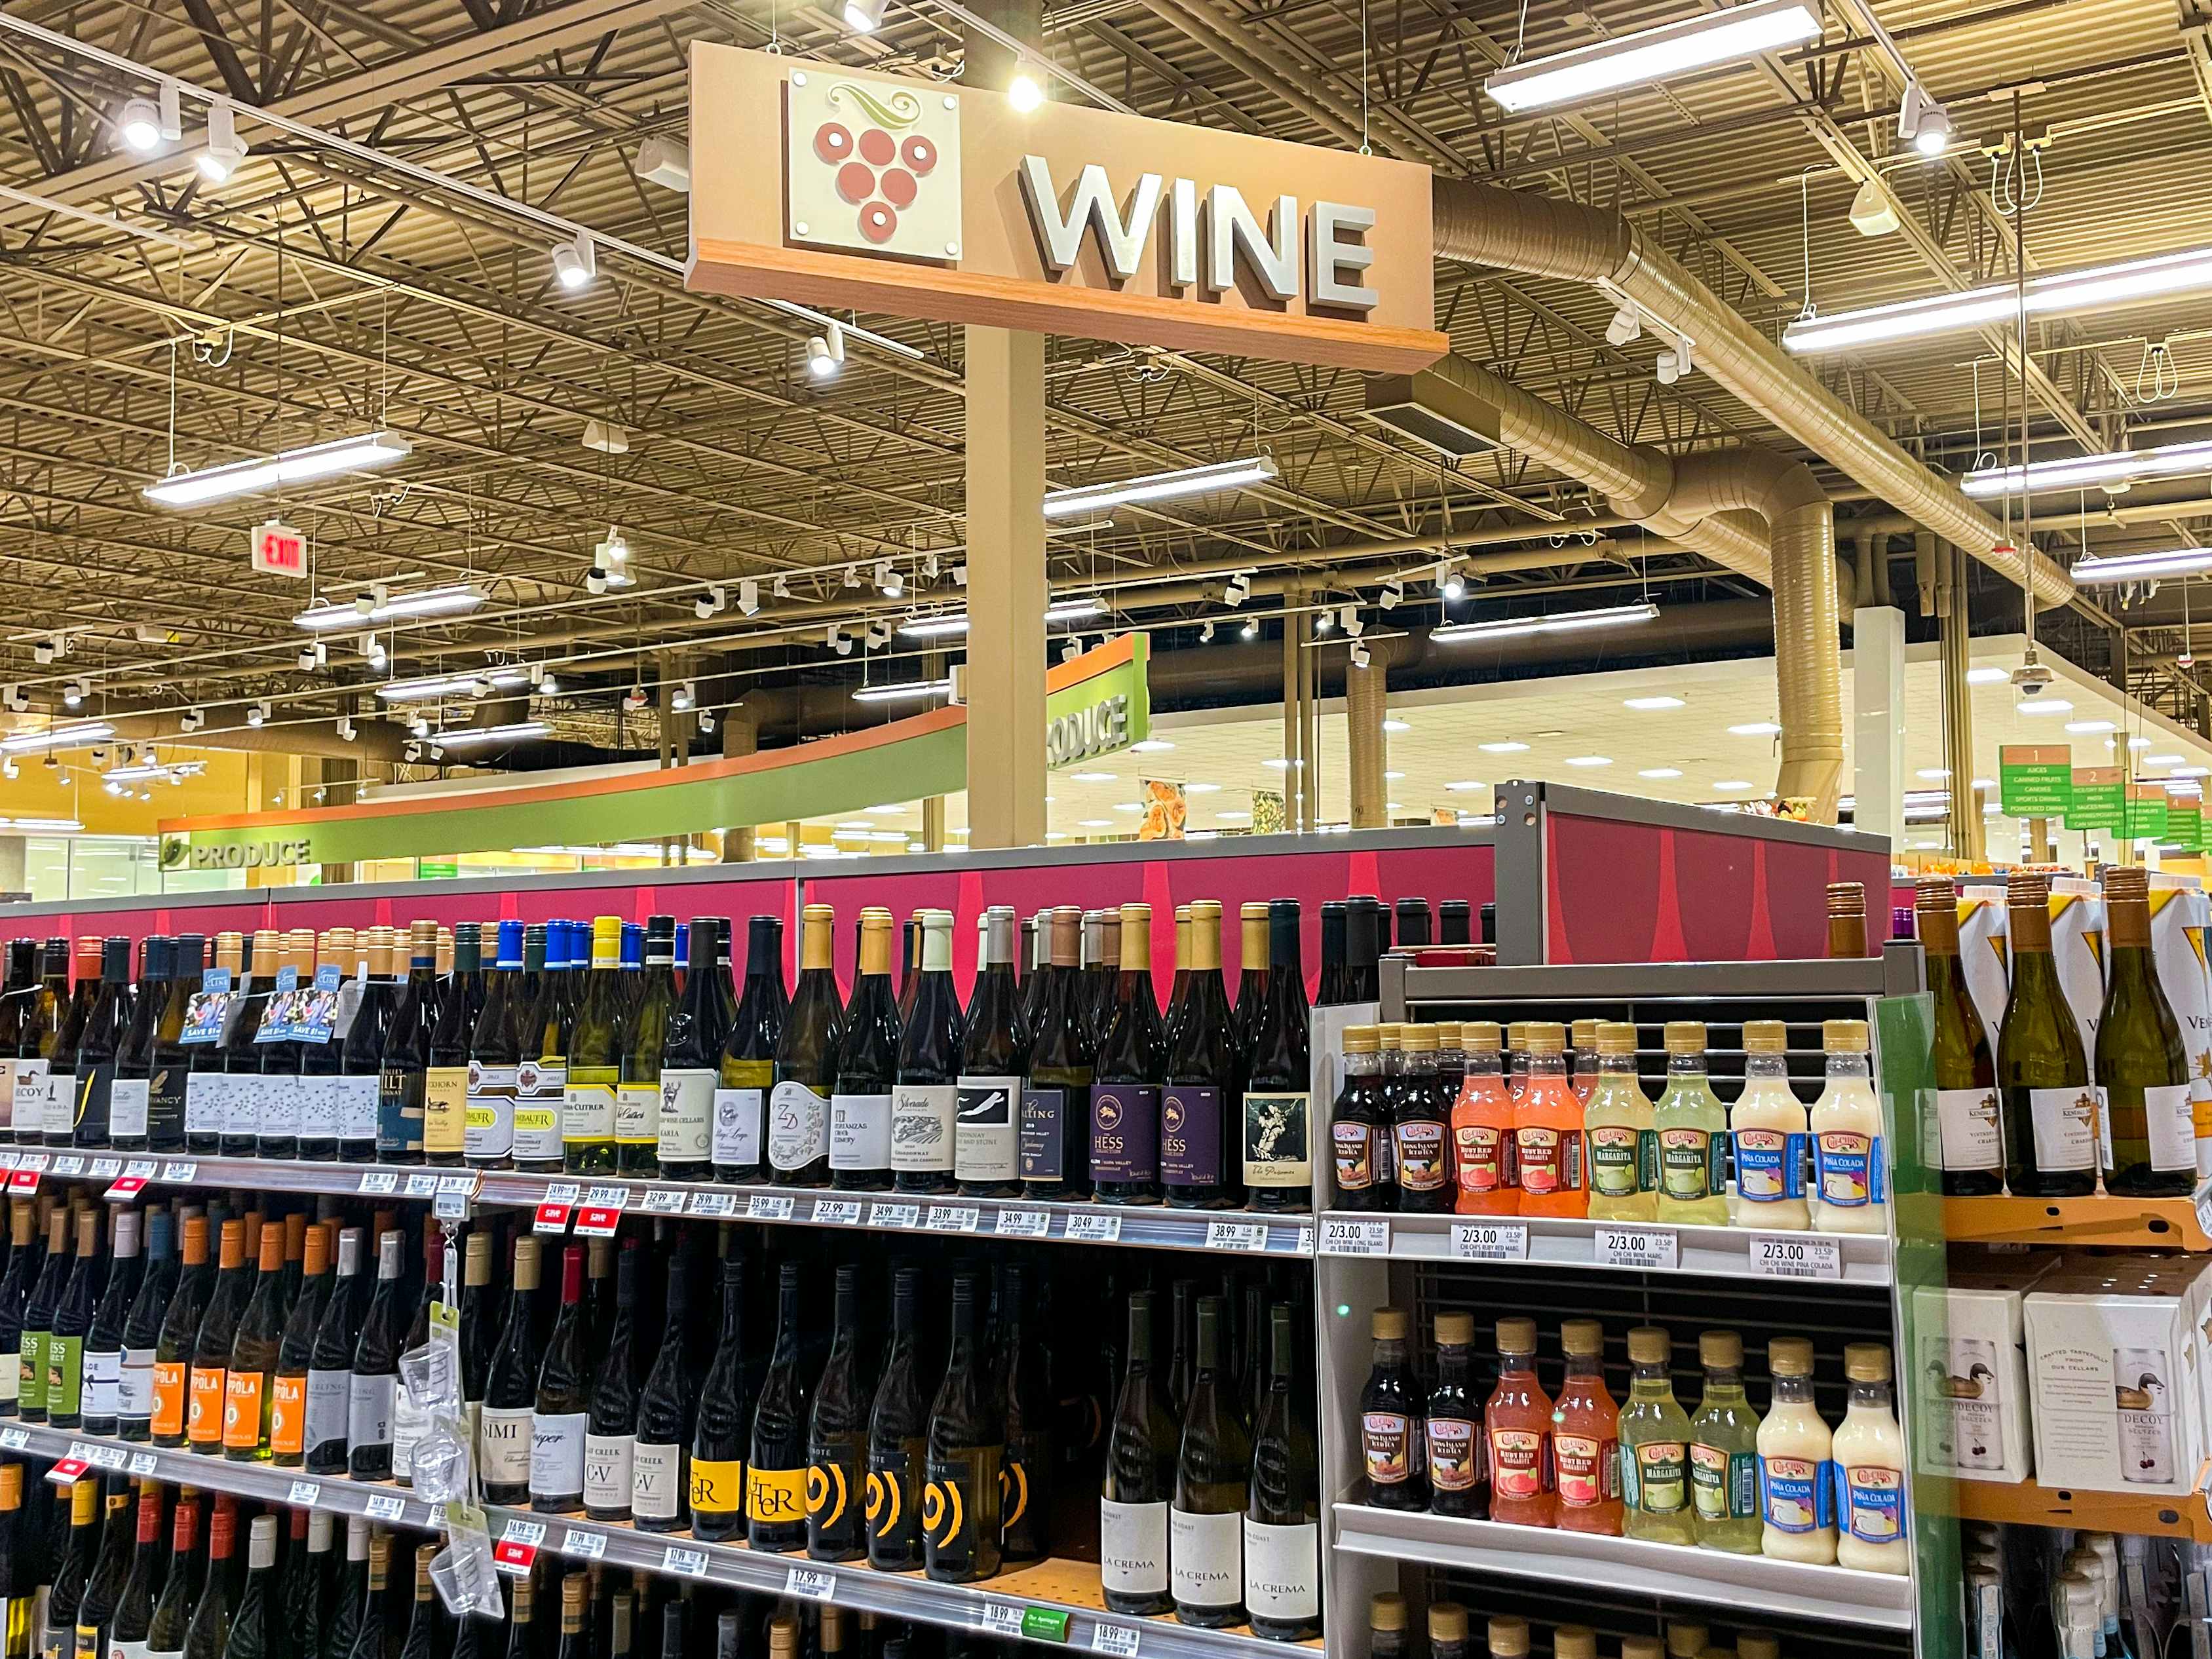 The wine section at Publix